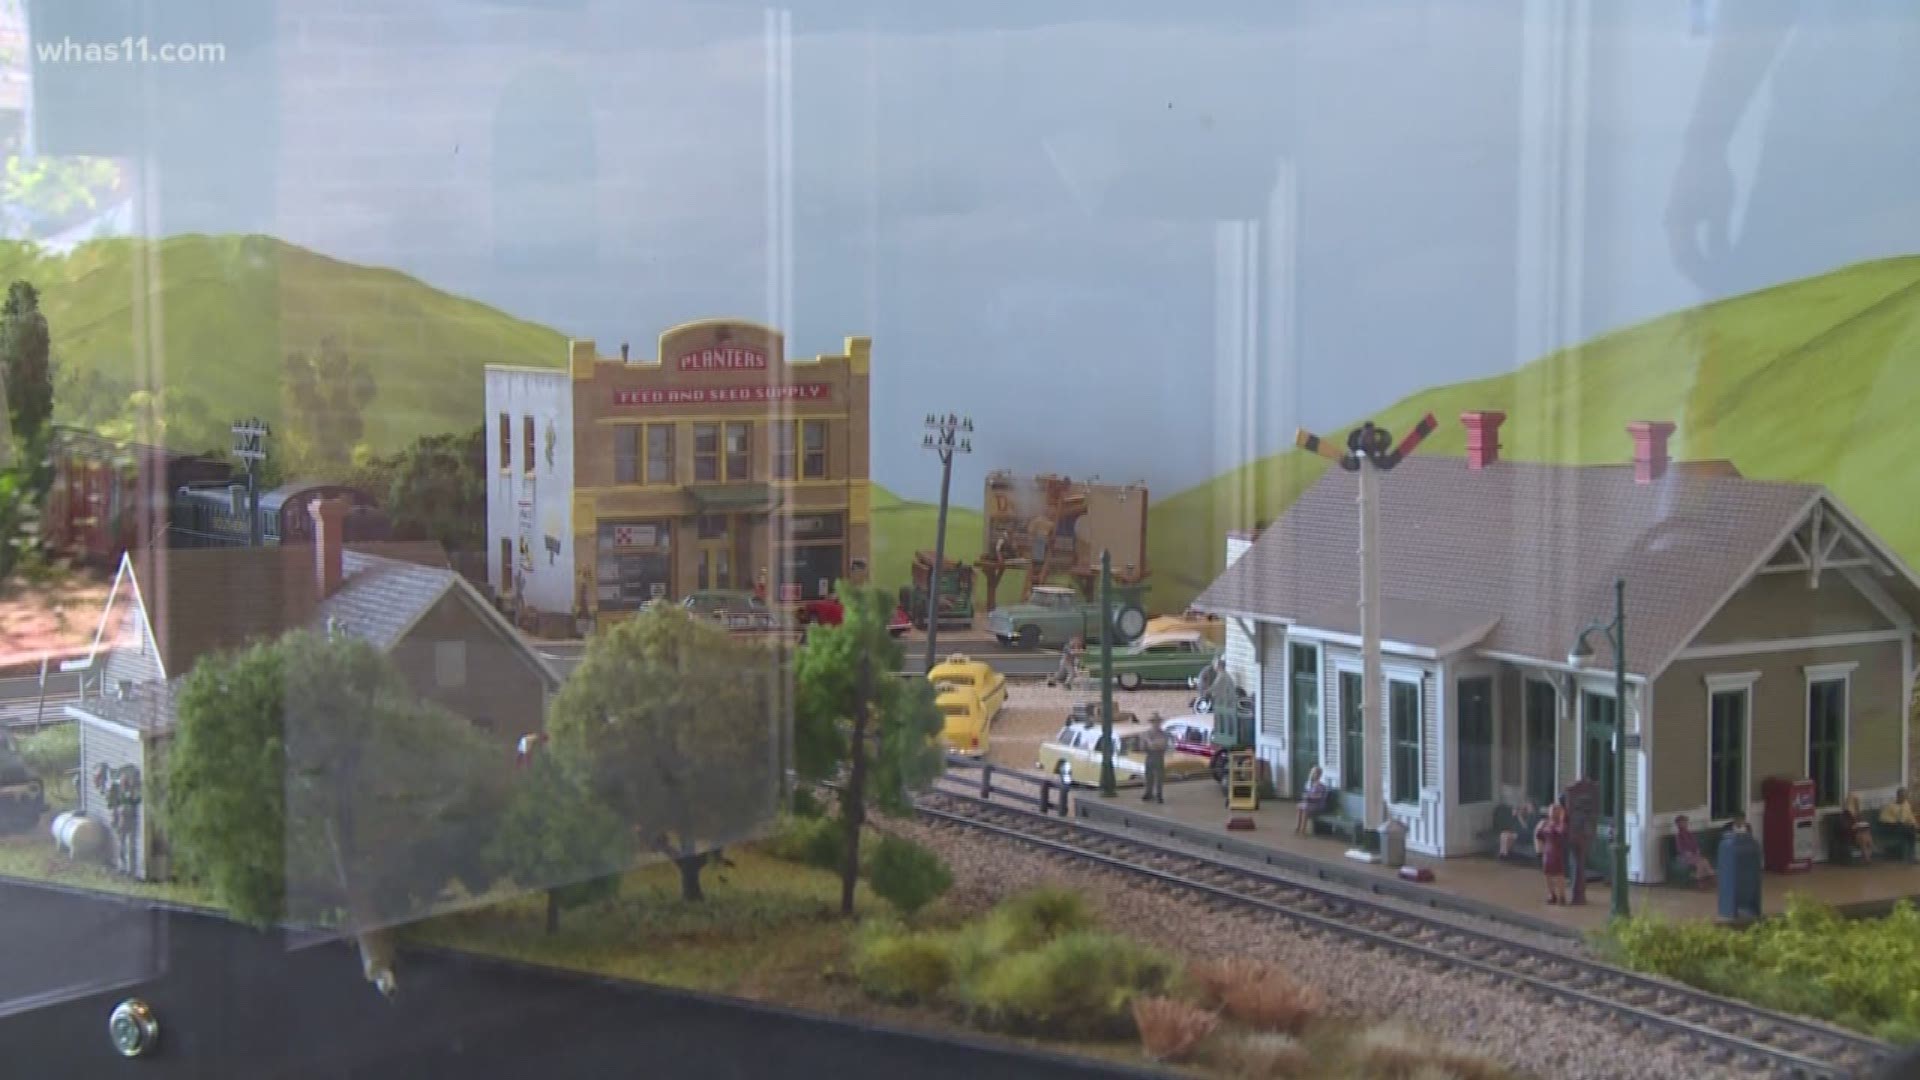 Twenty-six years ago, a group of guys started a model railroad club in a garage. Now they show off their collection at libraries all over Louisville.